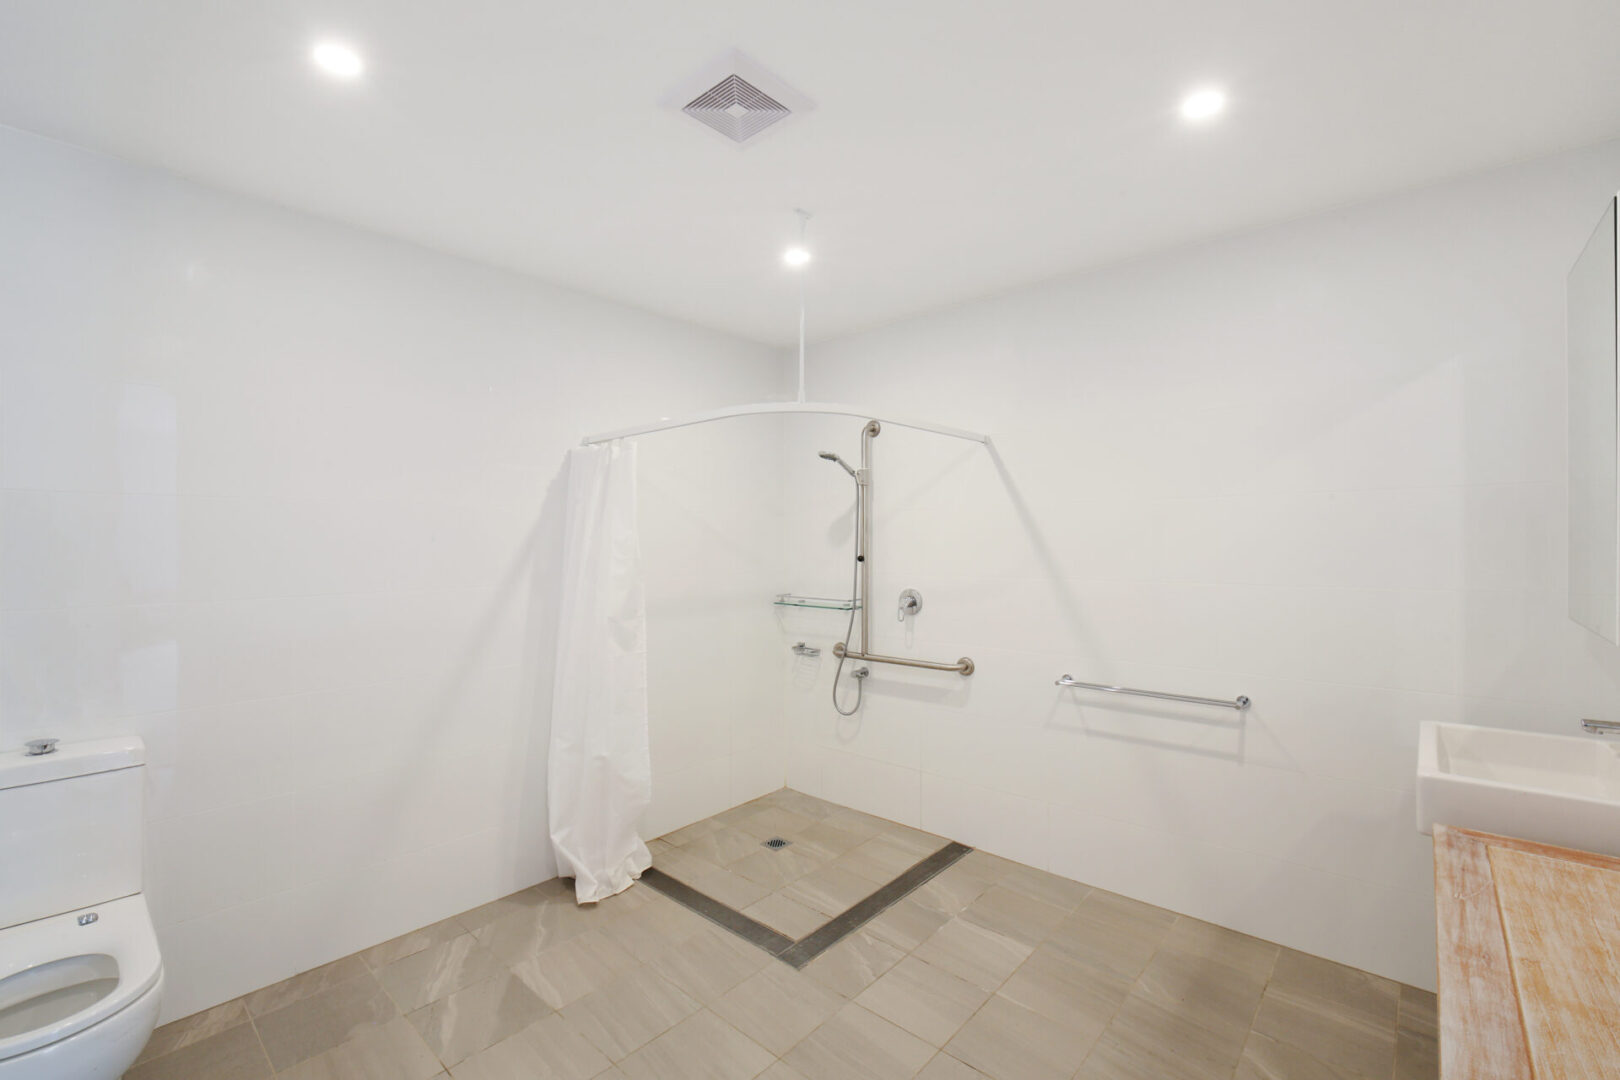 A bathroom with a shower and tiled floor.